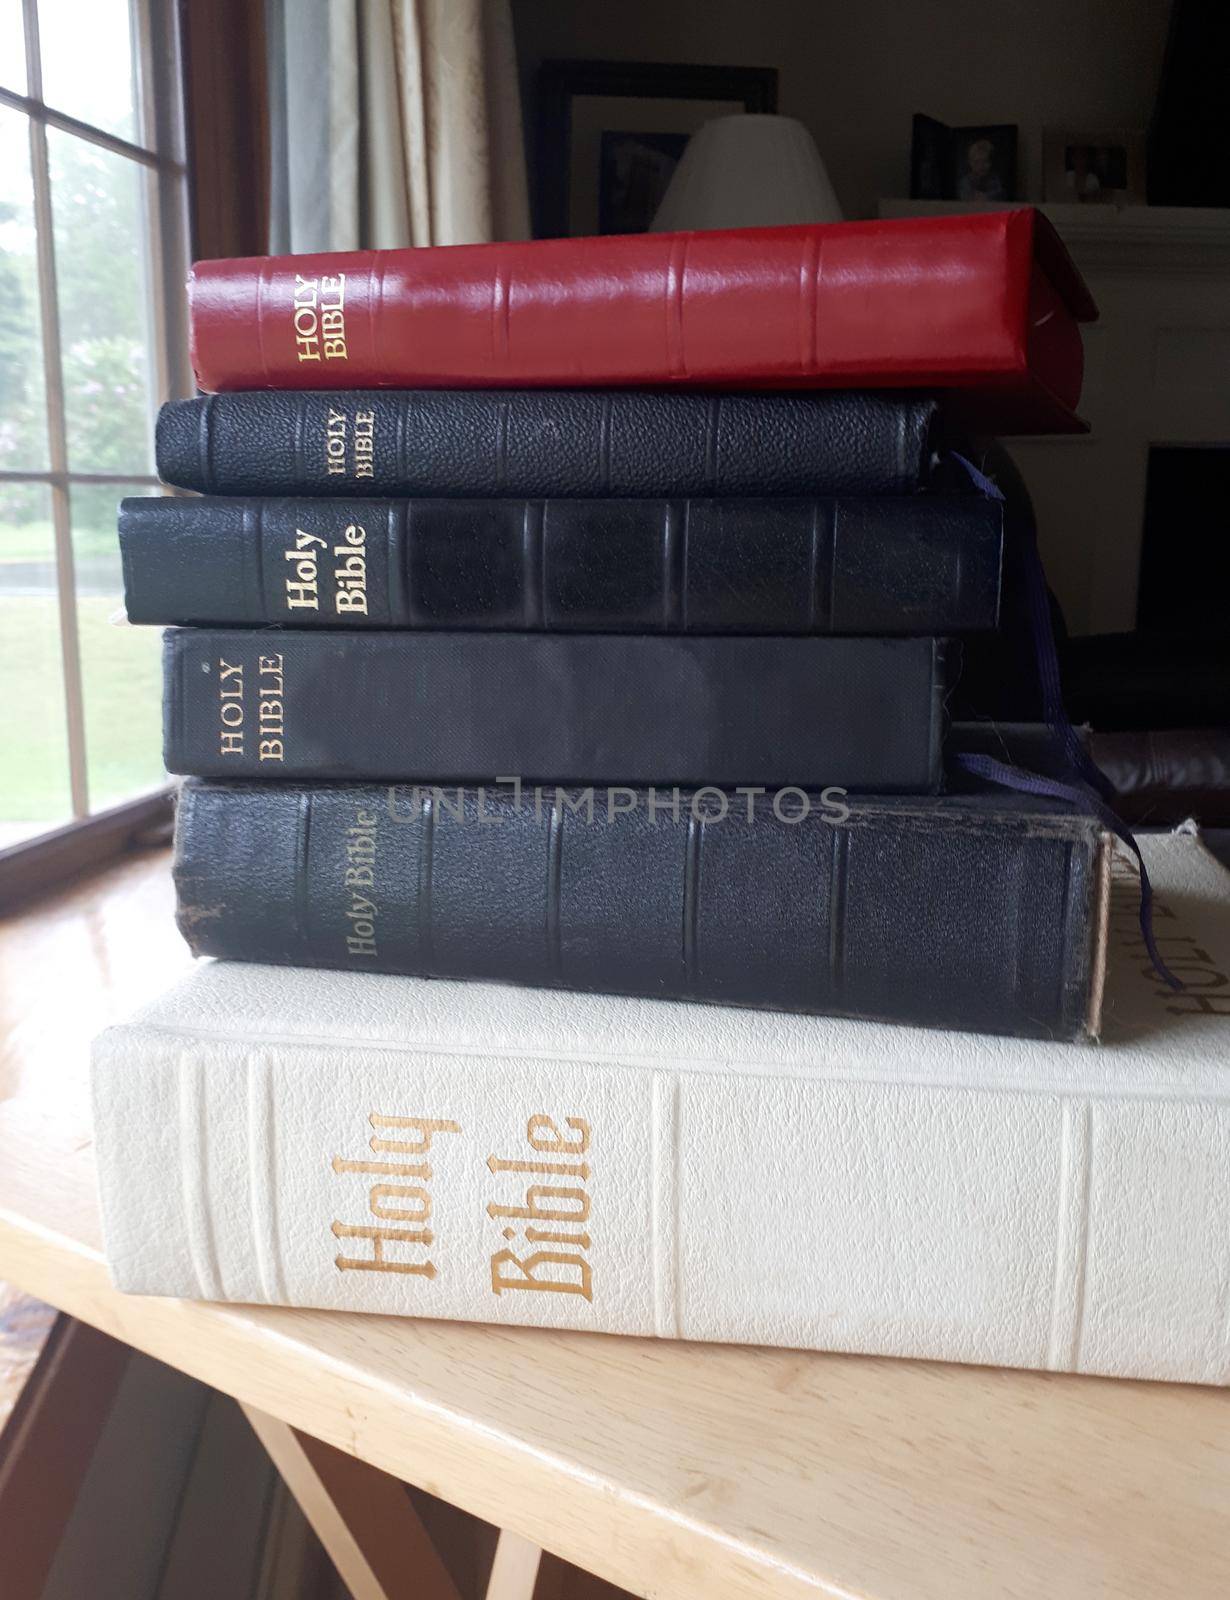  Five bibles stacked up on a table 